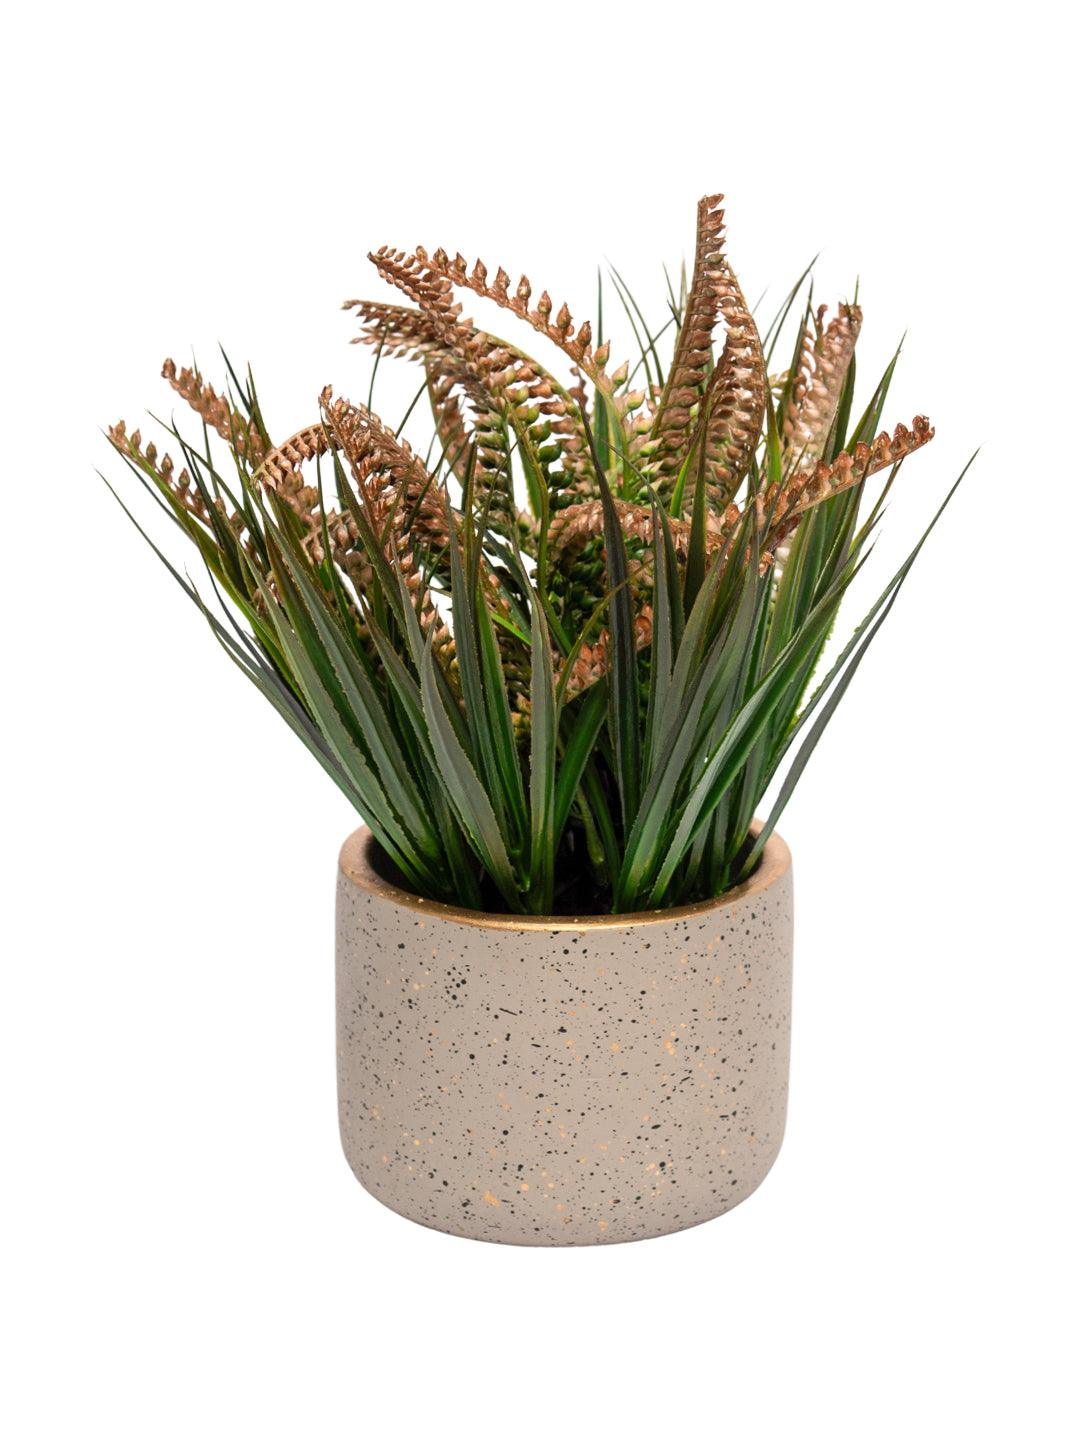 Grey Pot With Brown & Green Plant - MARKET 99